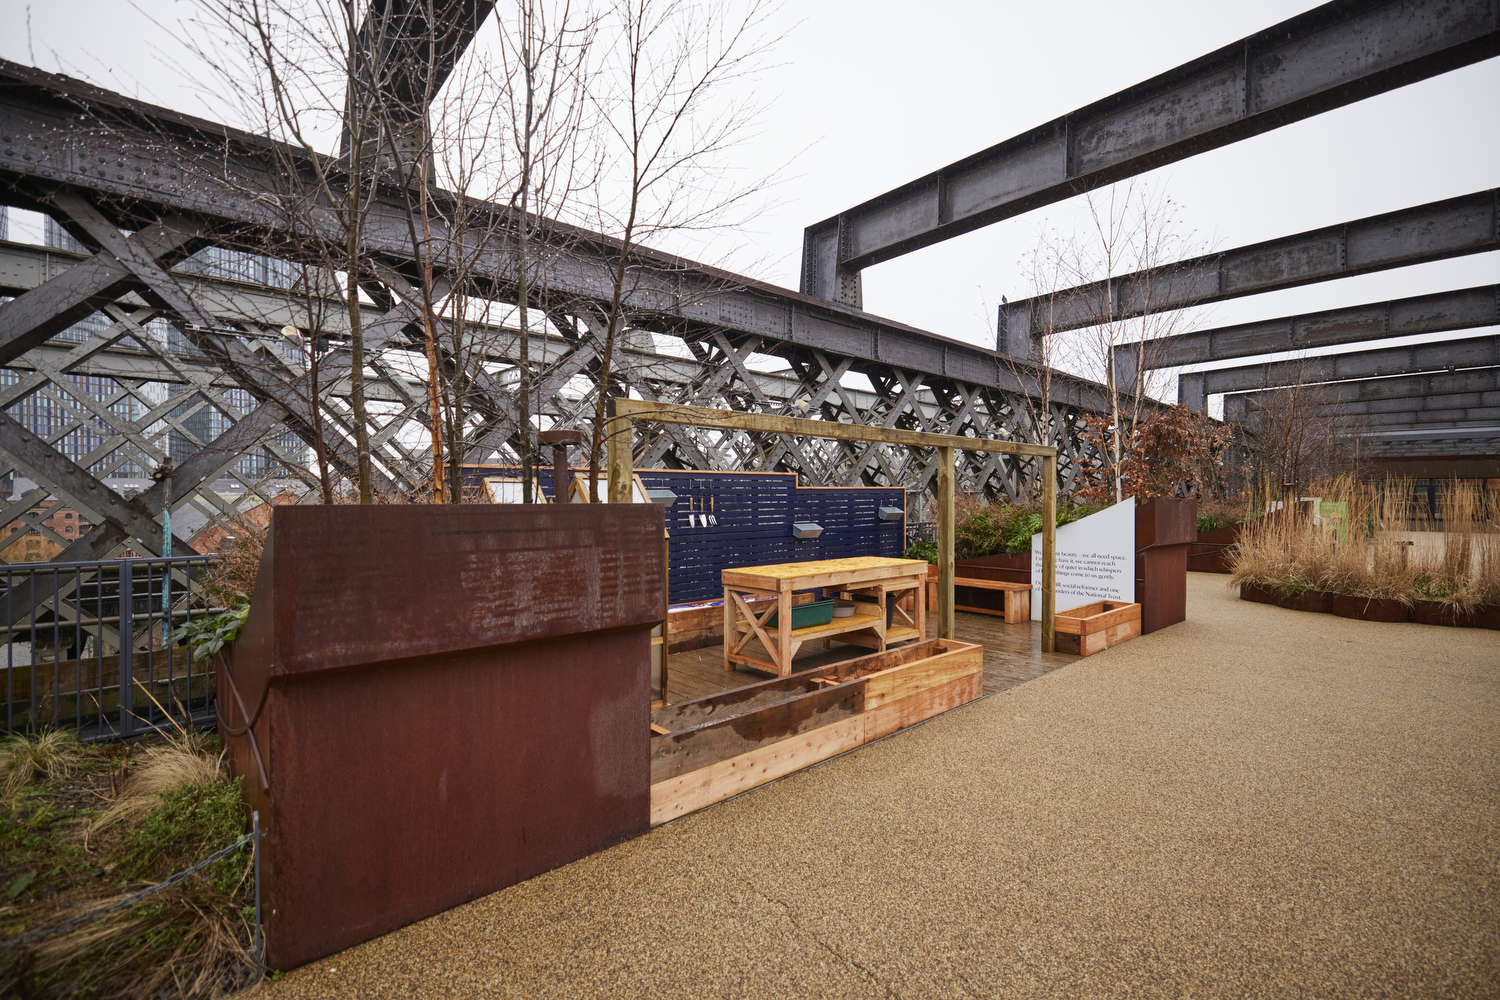 National Trust head gardener nancy and Kate Picker visitor operations and experience manager Manchester’s Castlefield Viaduct sets to re-open after the winter months.